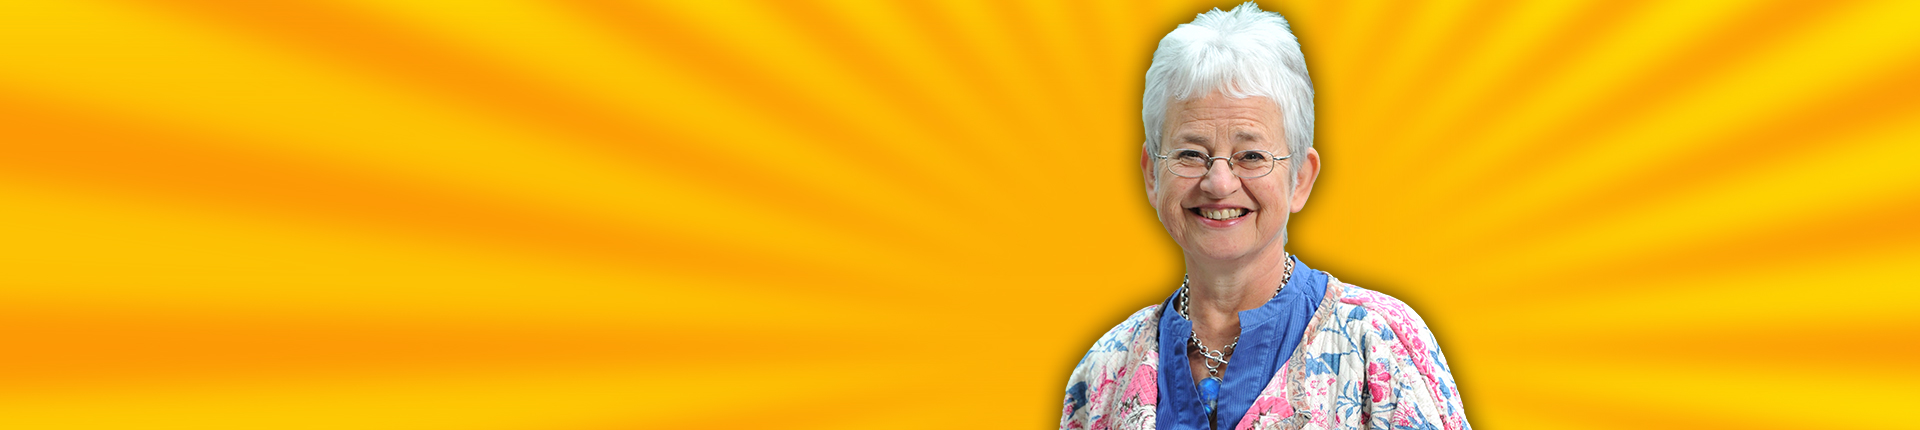 A photo of author Jacqueline Wilson on a yellow background with sun rays coming from behind her